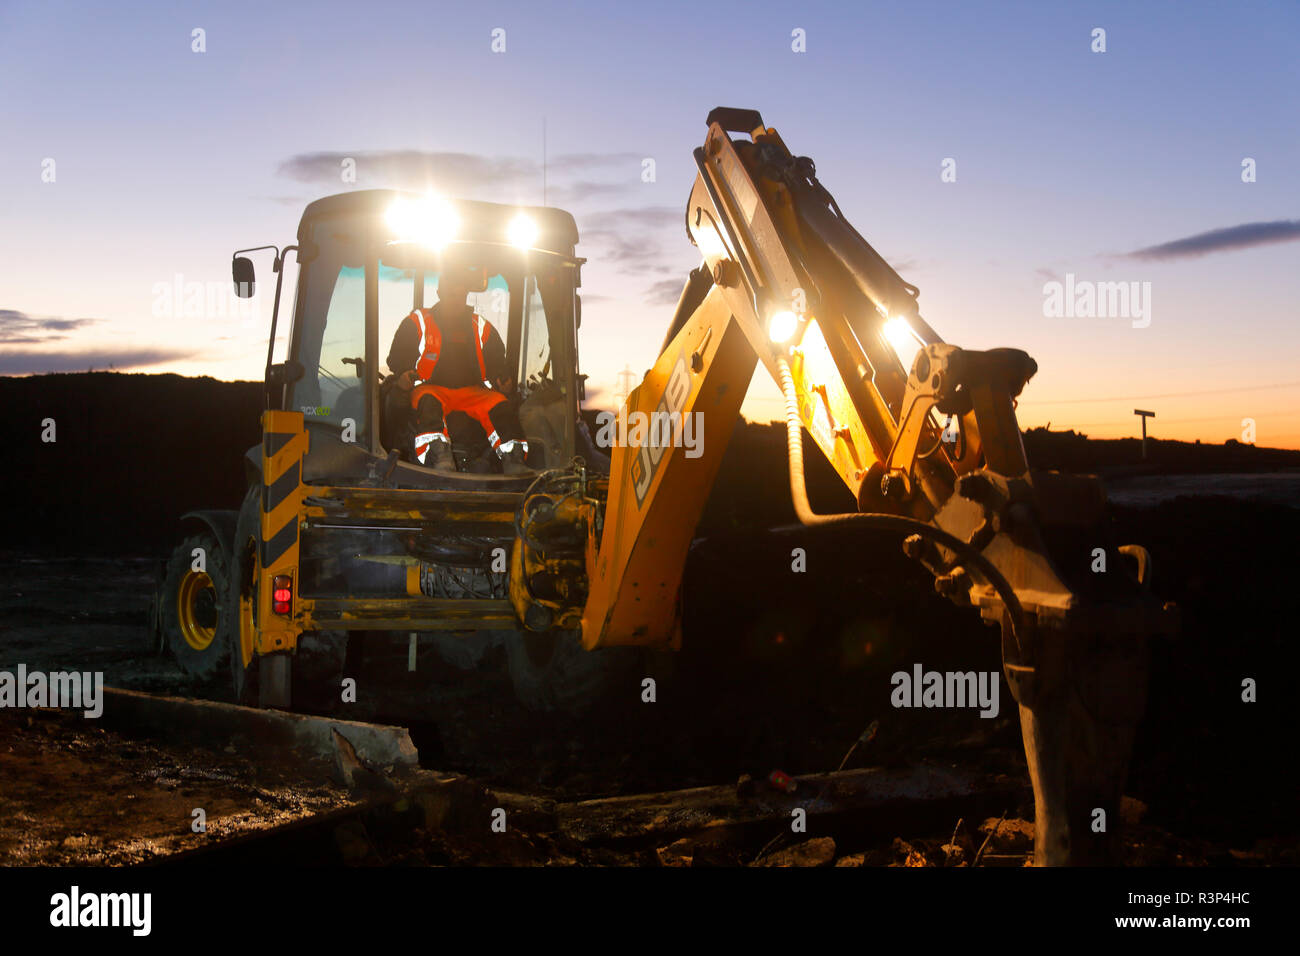 A JCB 3CX parked up on the FARRRS link road construction site compound Stock Photo